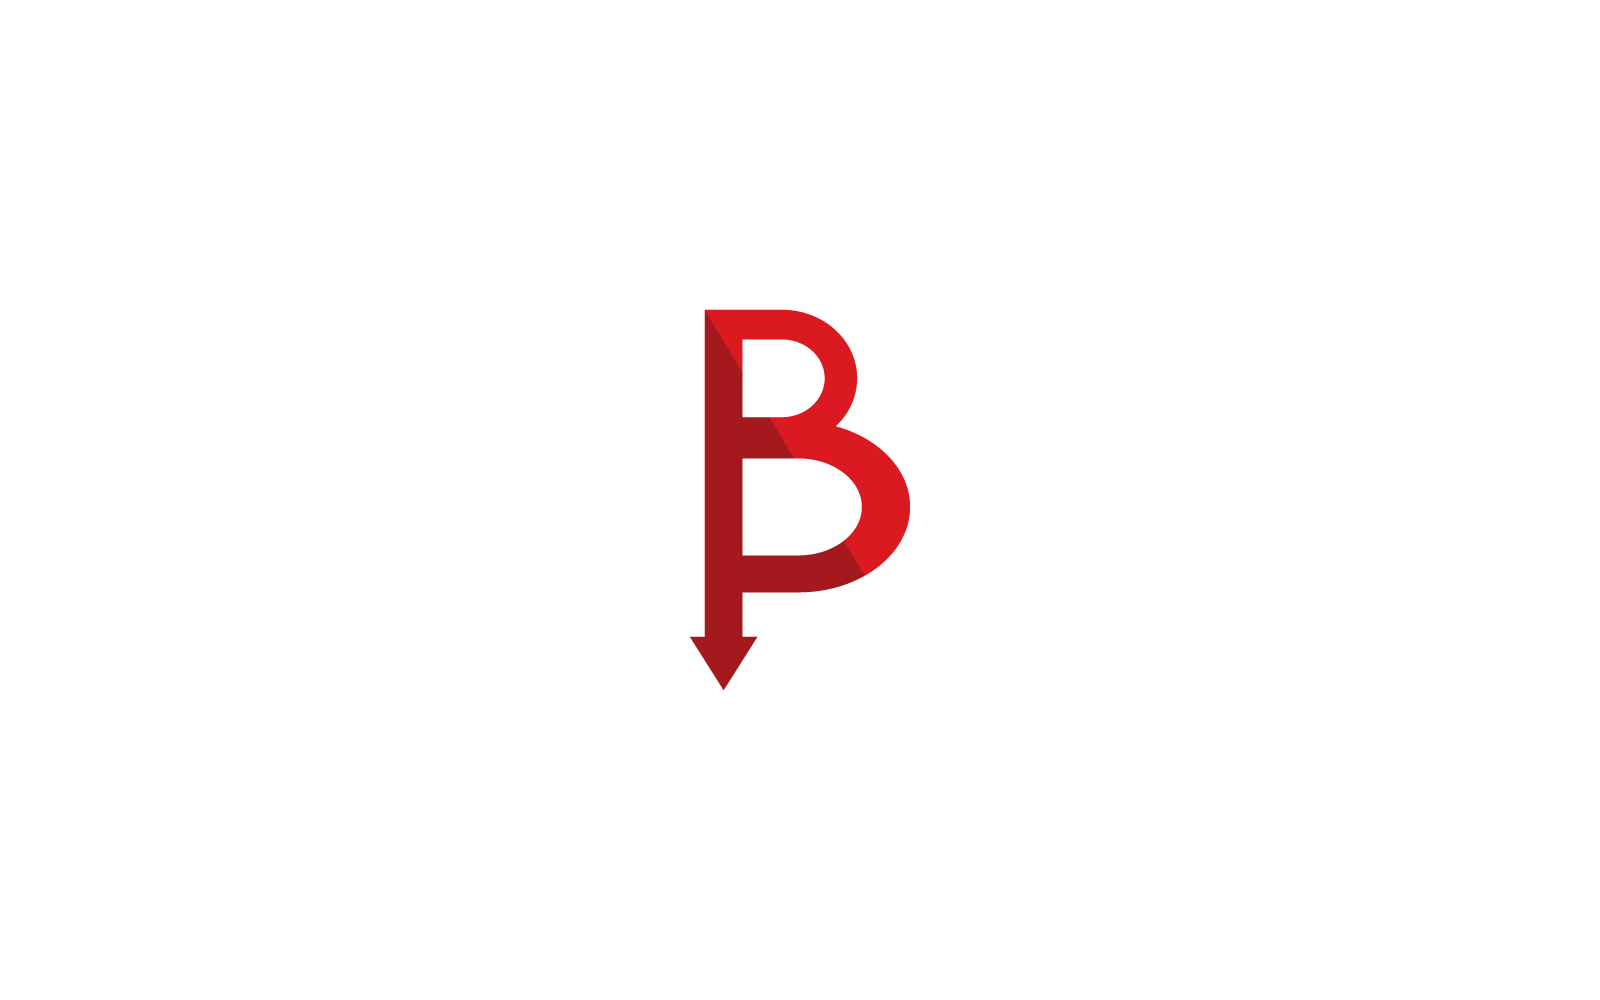 B Initial letter with arrow design illustration